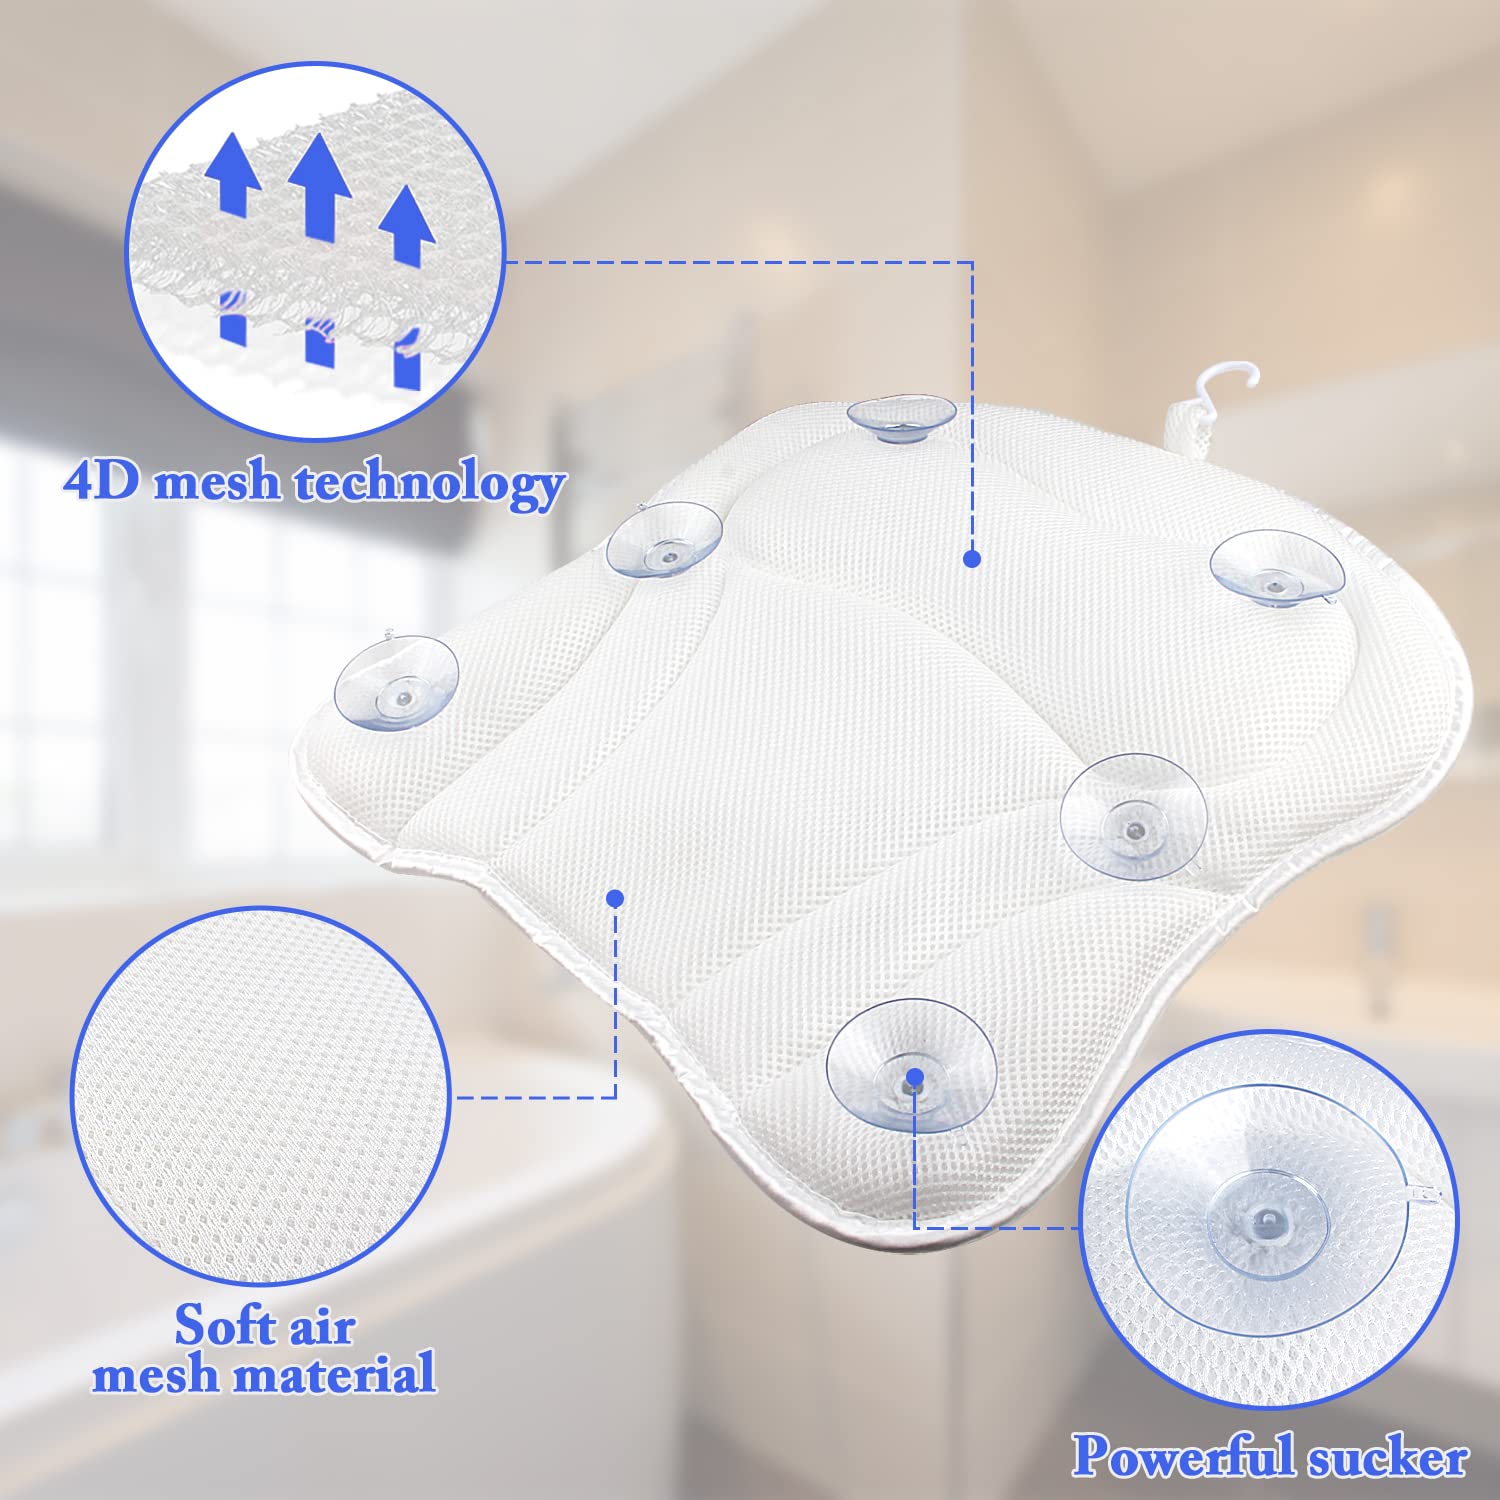 Bath Pillow for Tub Comfort Bathtub Pillow, Ergonomic Bath Pillows for Tub Neck and Back Support with 6 Suction Cups, Ultra-Soft 4D Air Mesh Design SPA Tub Bath Pillow for Women & Men